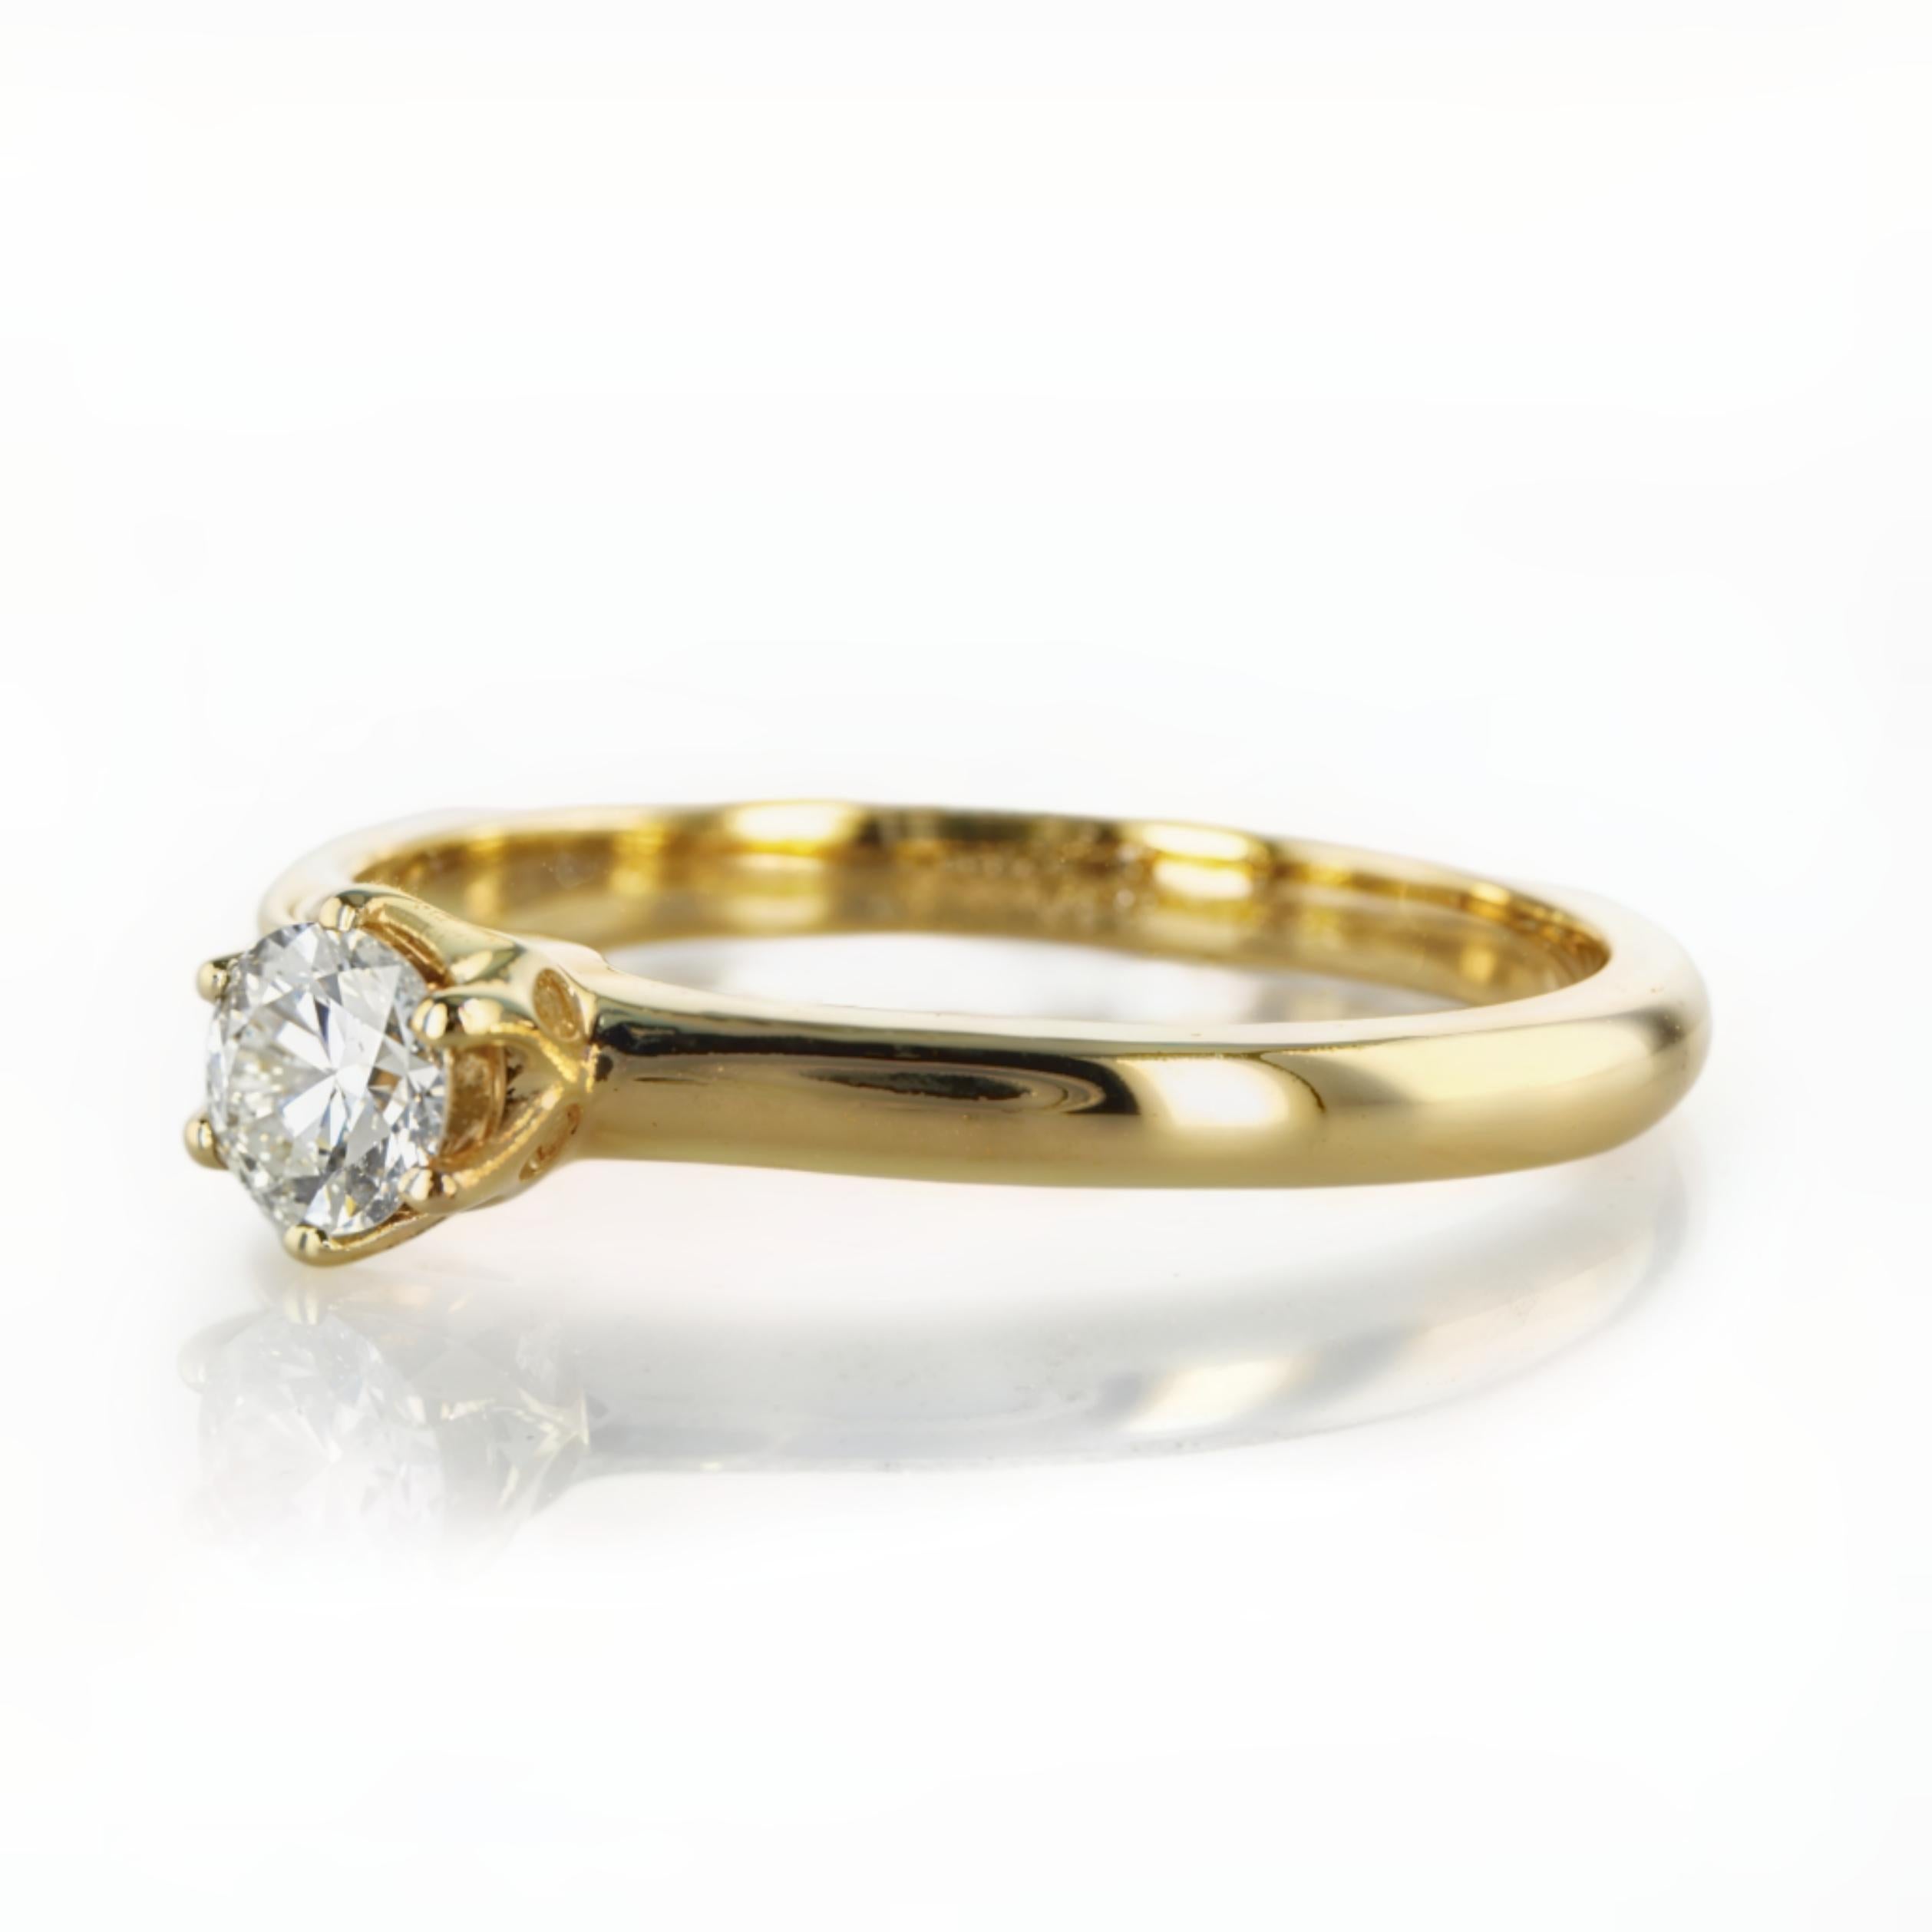 For Sale:  Stunning Classic 0.25 Carat Diamond Solitaire Ring in 14K Gold 2